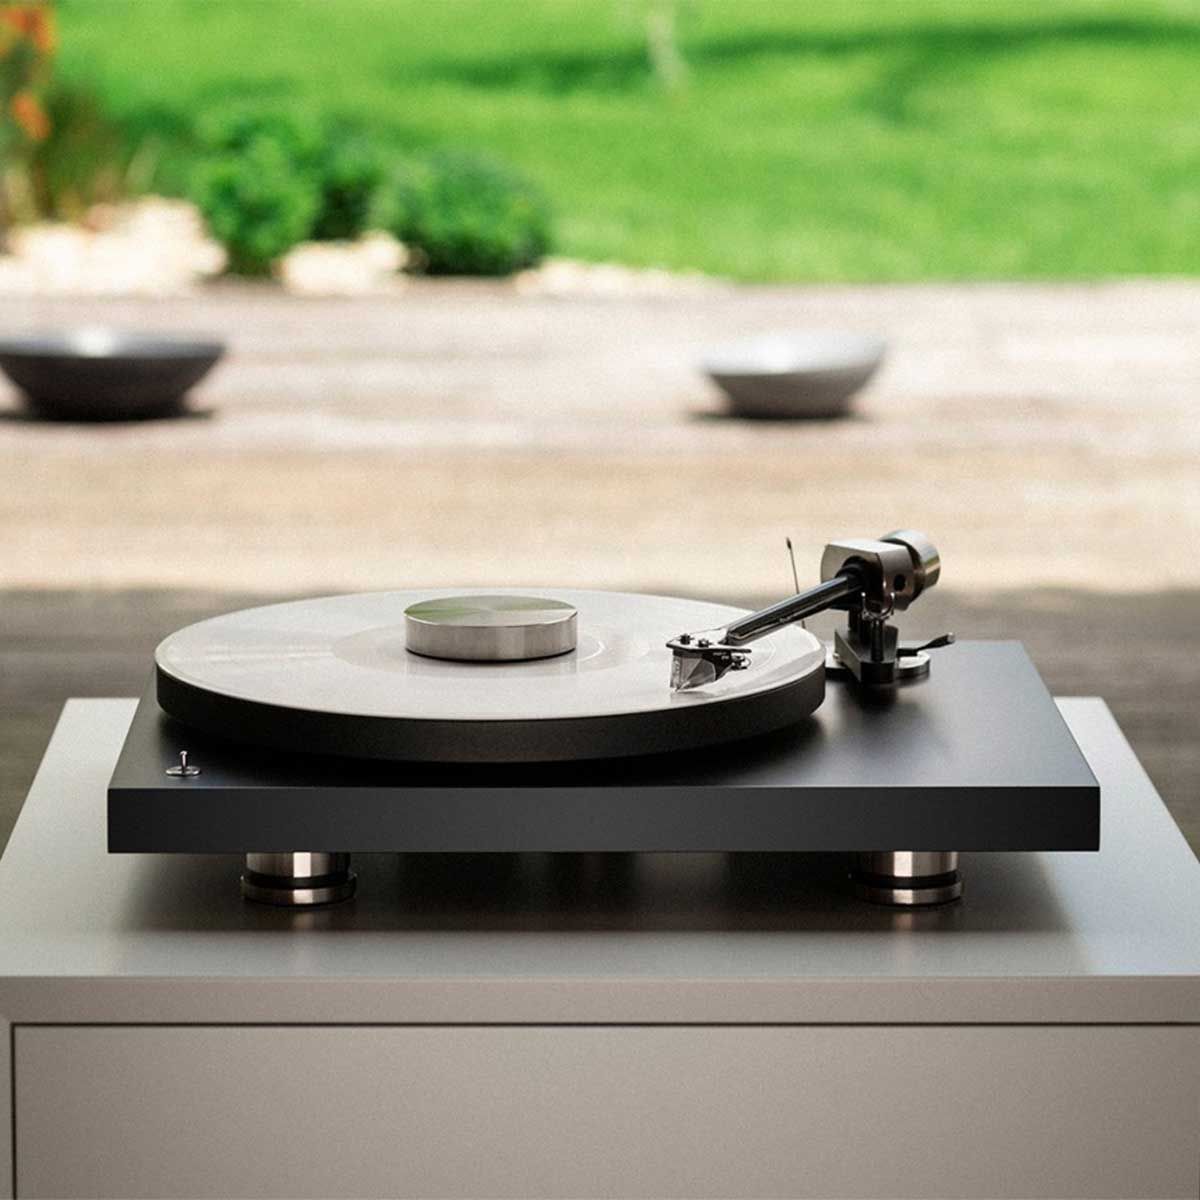 Pro-Ject Record Puck PRO, on top of a Pro-Ject Debut PRO Turntable